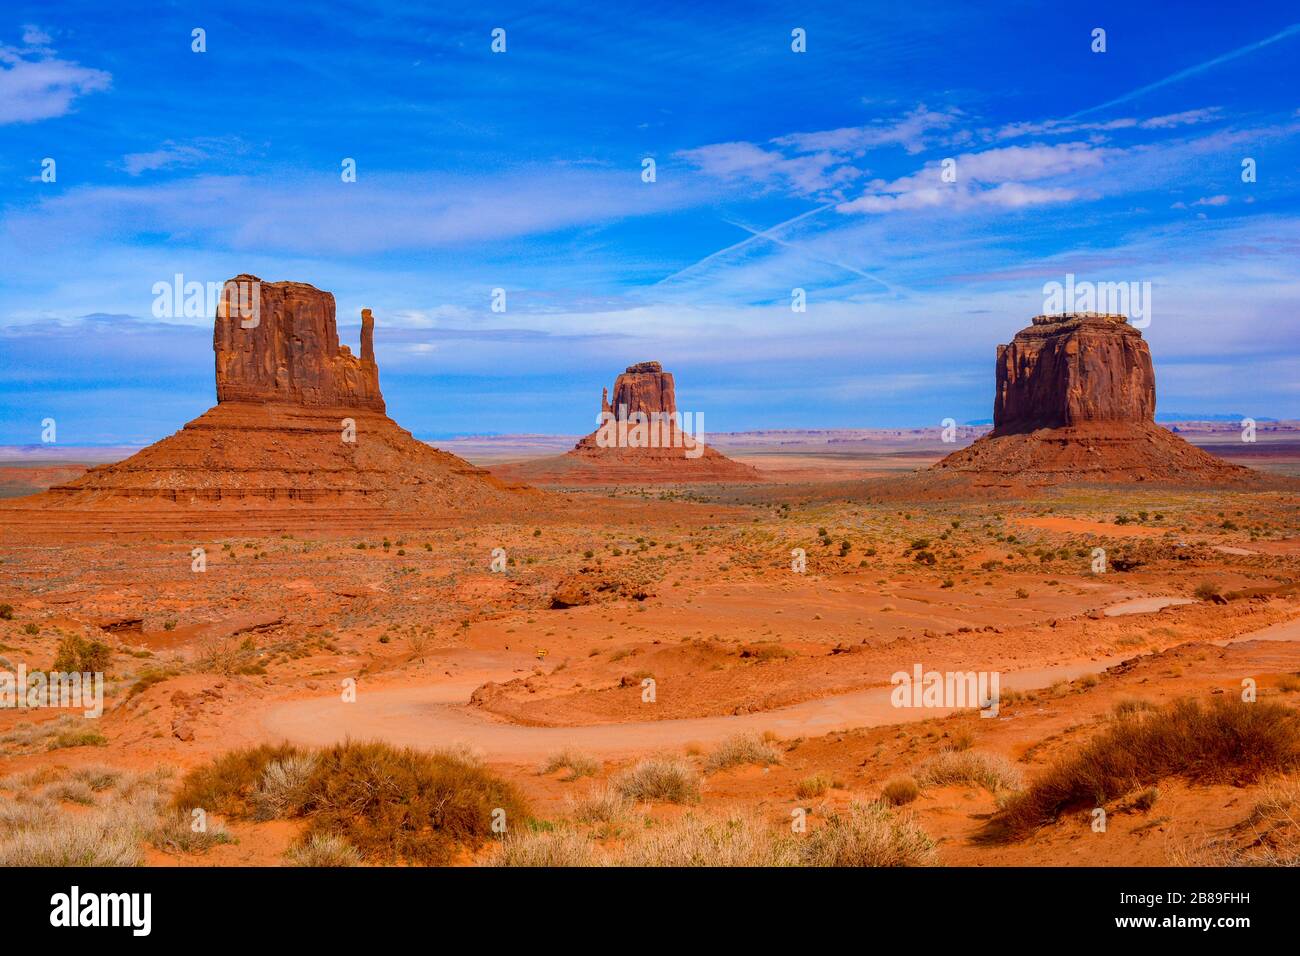 Amazing iconic view of Monument Valley, Utah, Arizona, USA. The most famous buttes: West Mitten, East Mitten and Merrick under a blue limitless sky Stock Photo